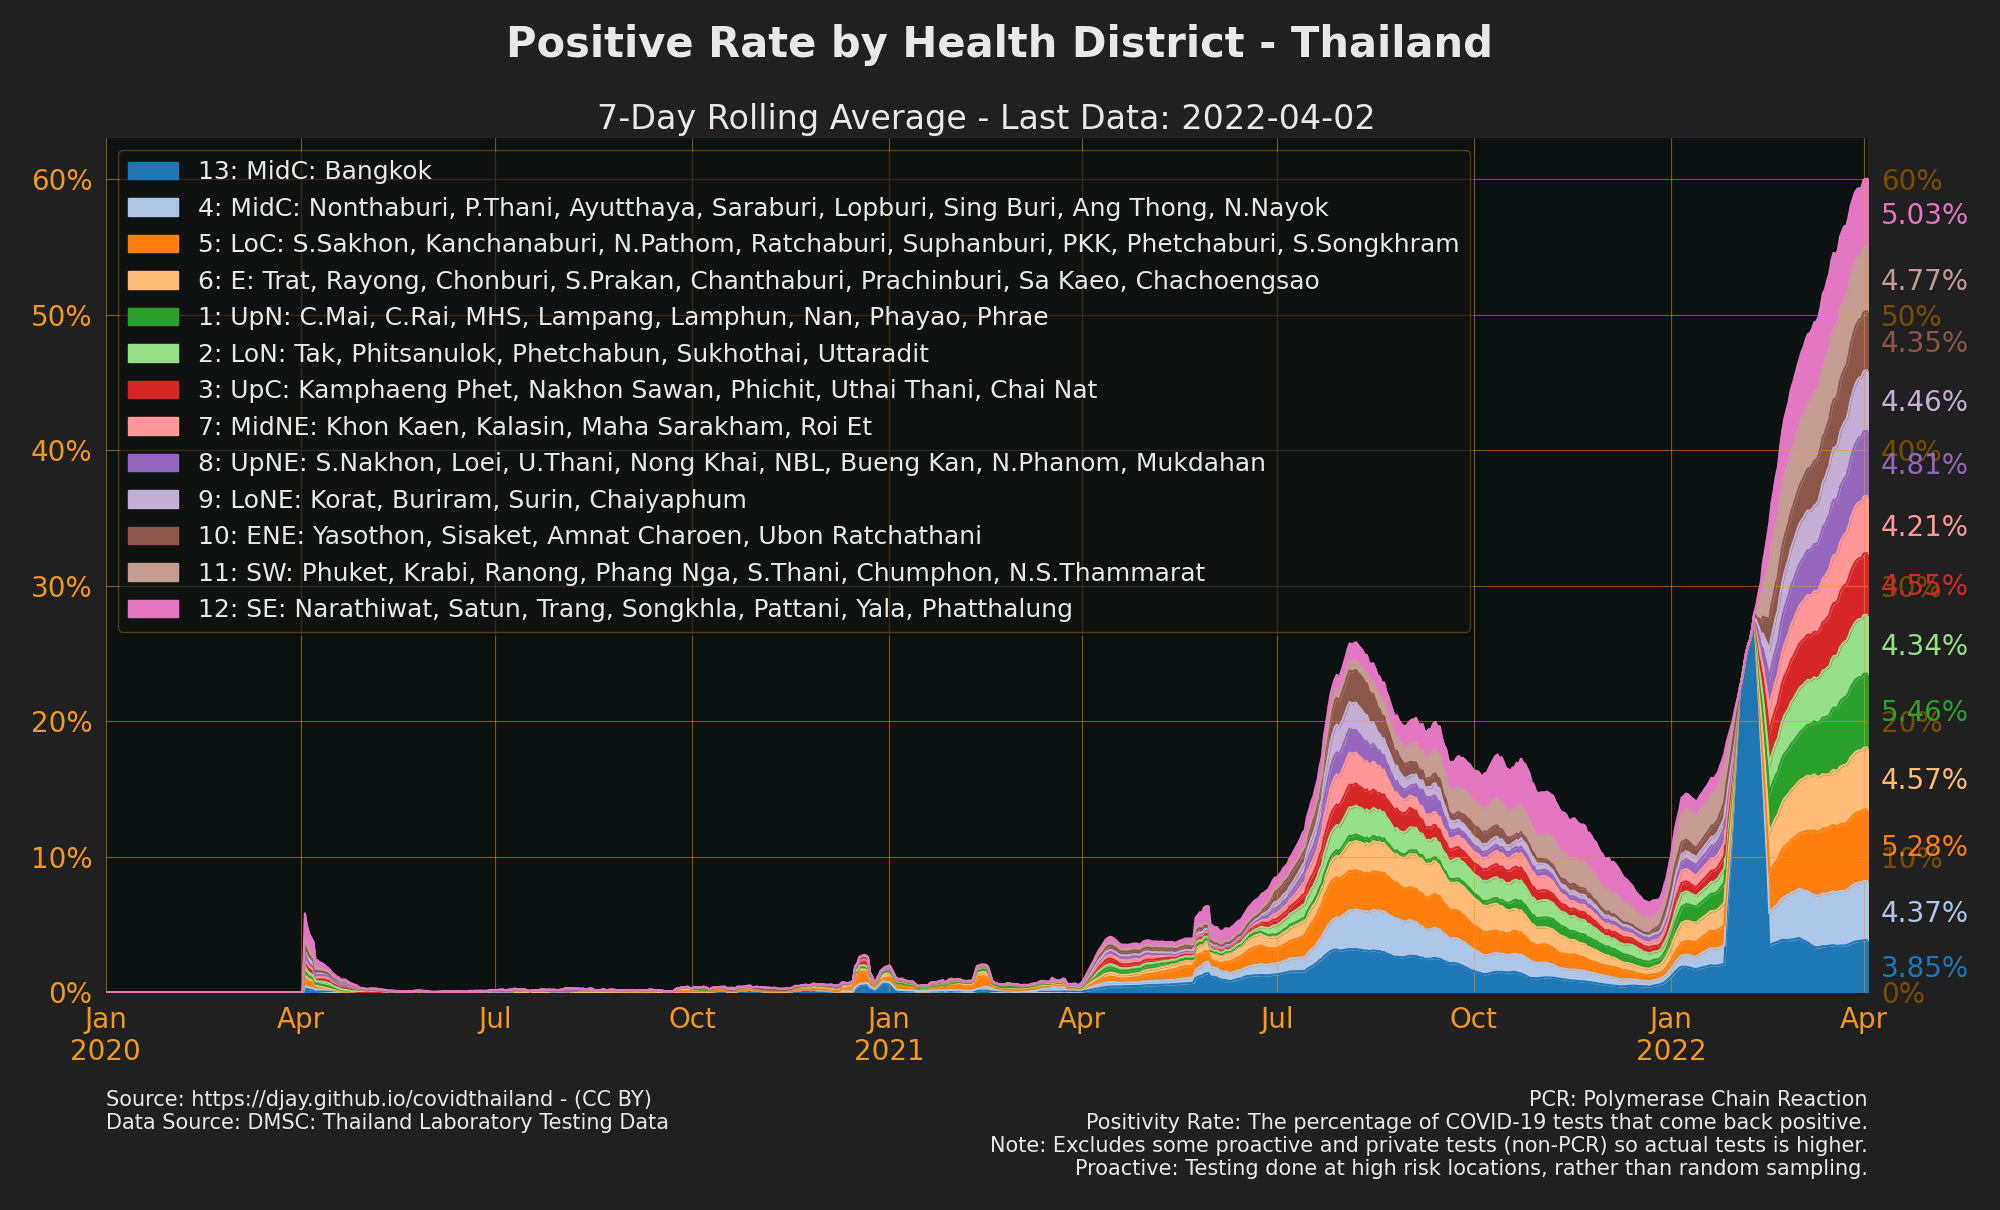 Positive Rate by Health District in overall positive rate (ex. some proactive tests)